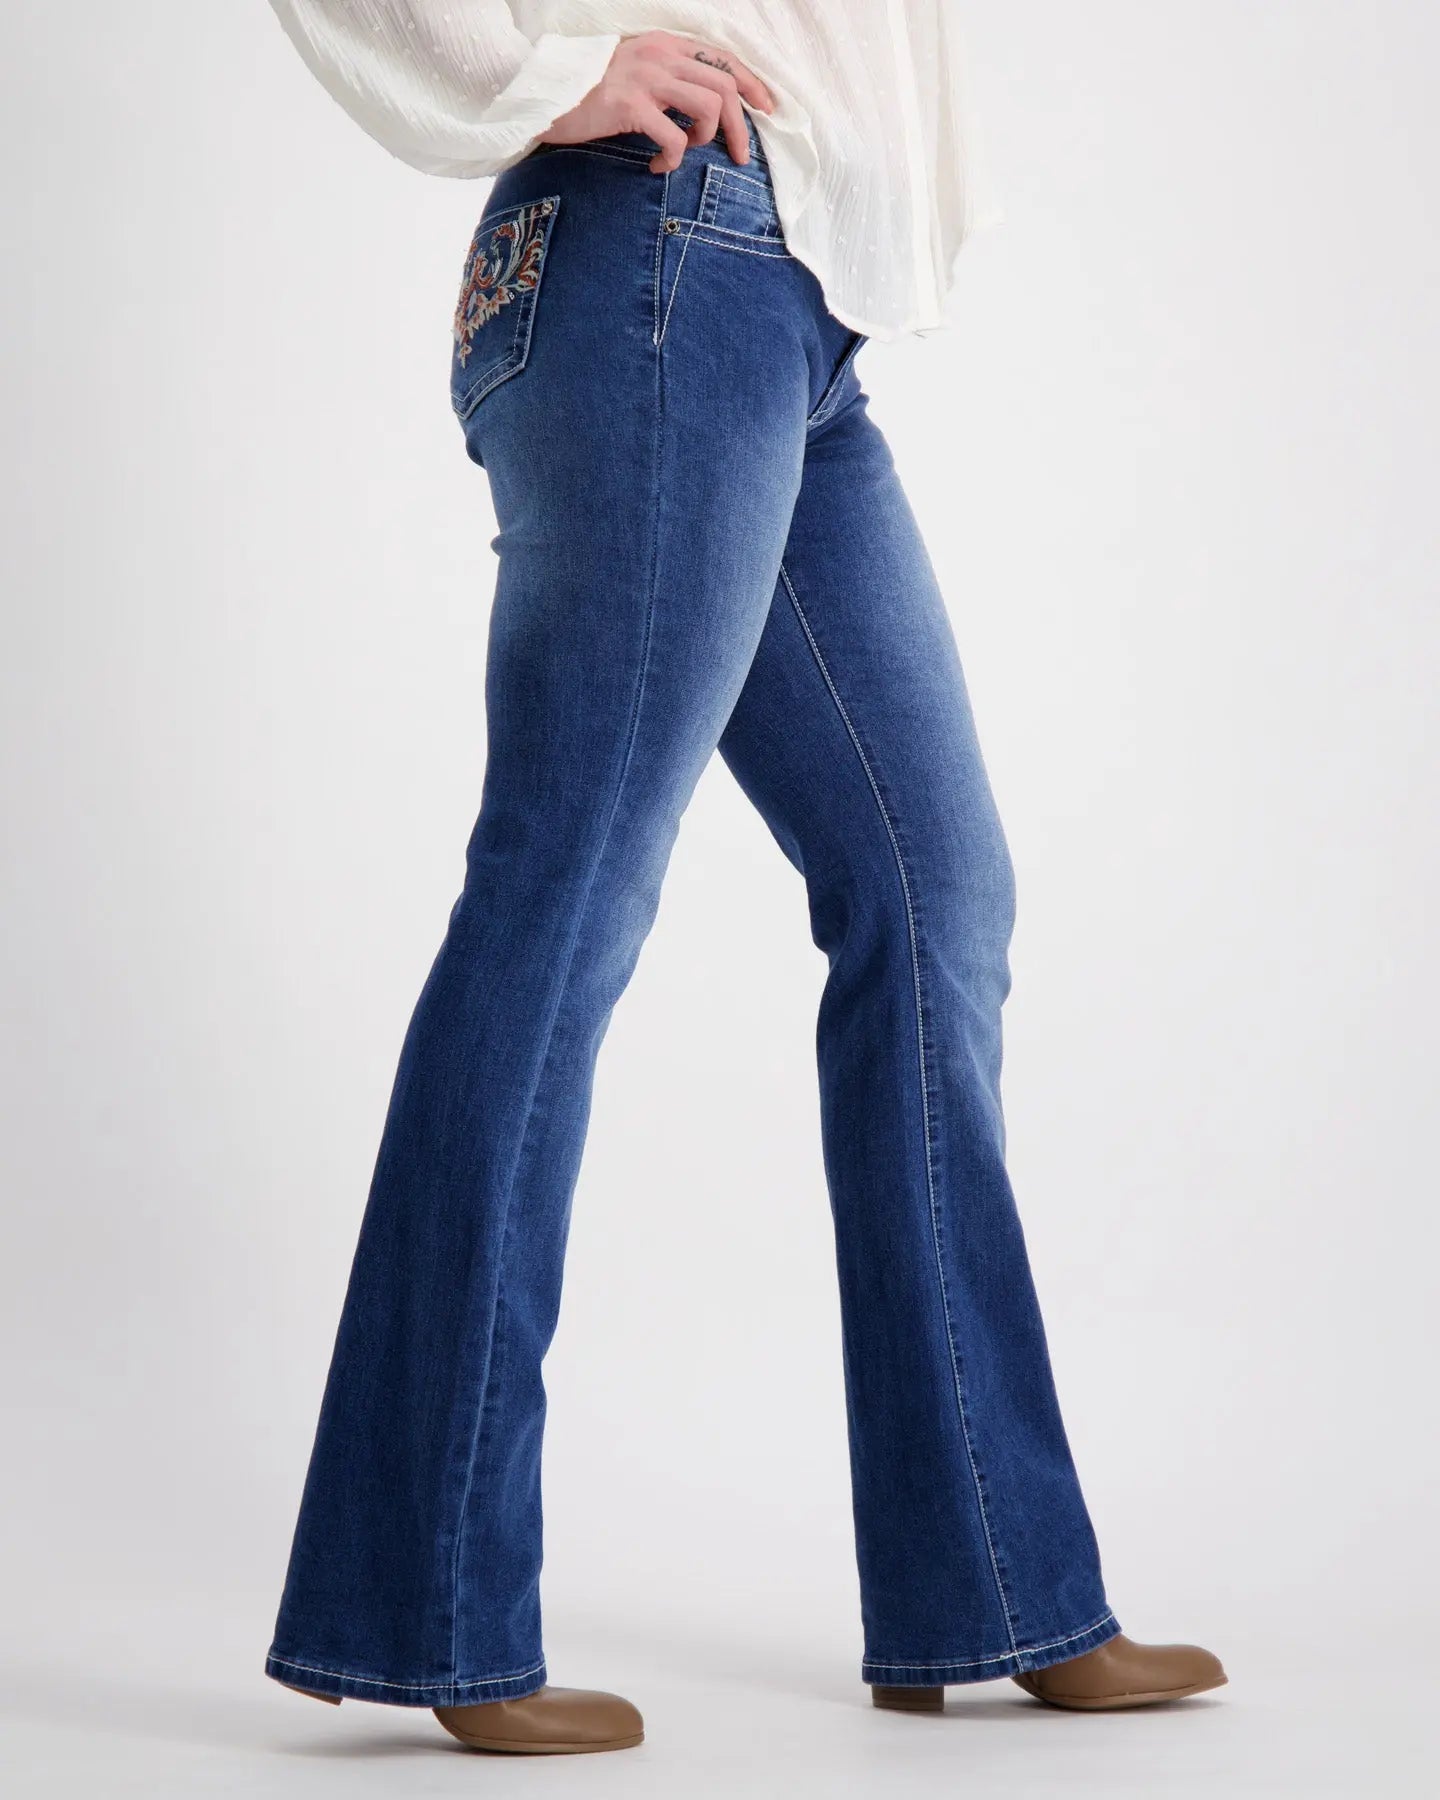 Jolene 2 Boot-Cut Jeans Outback Supply Co